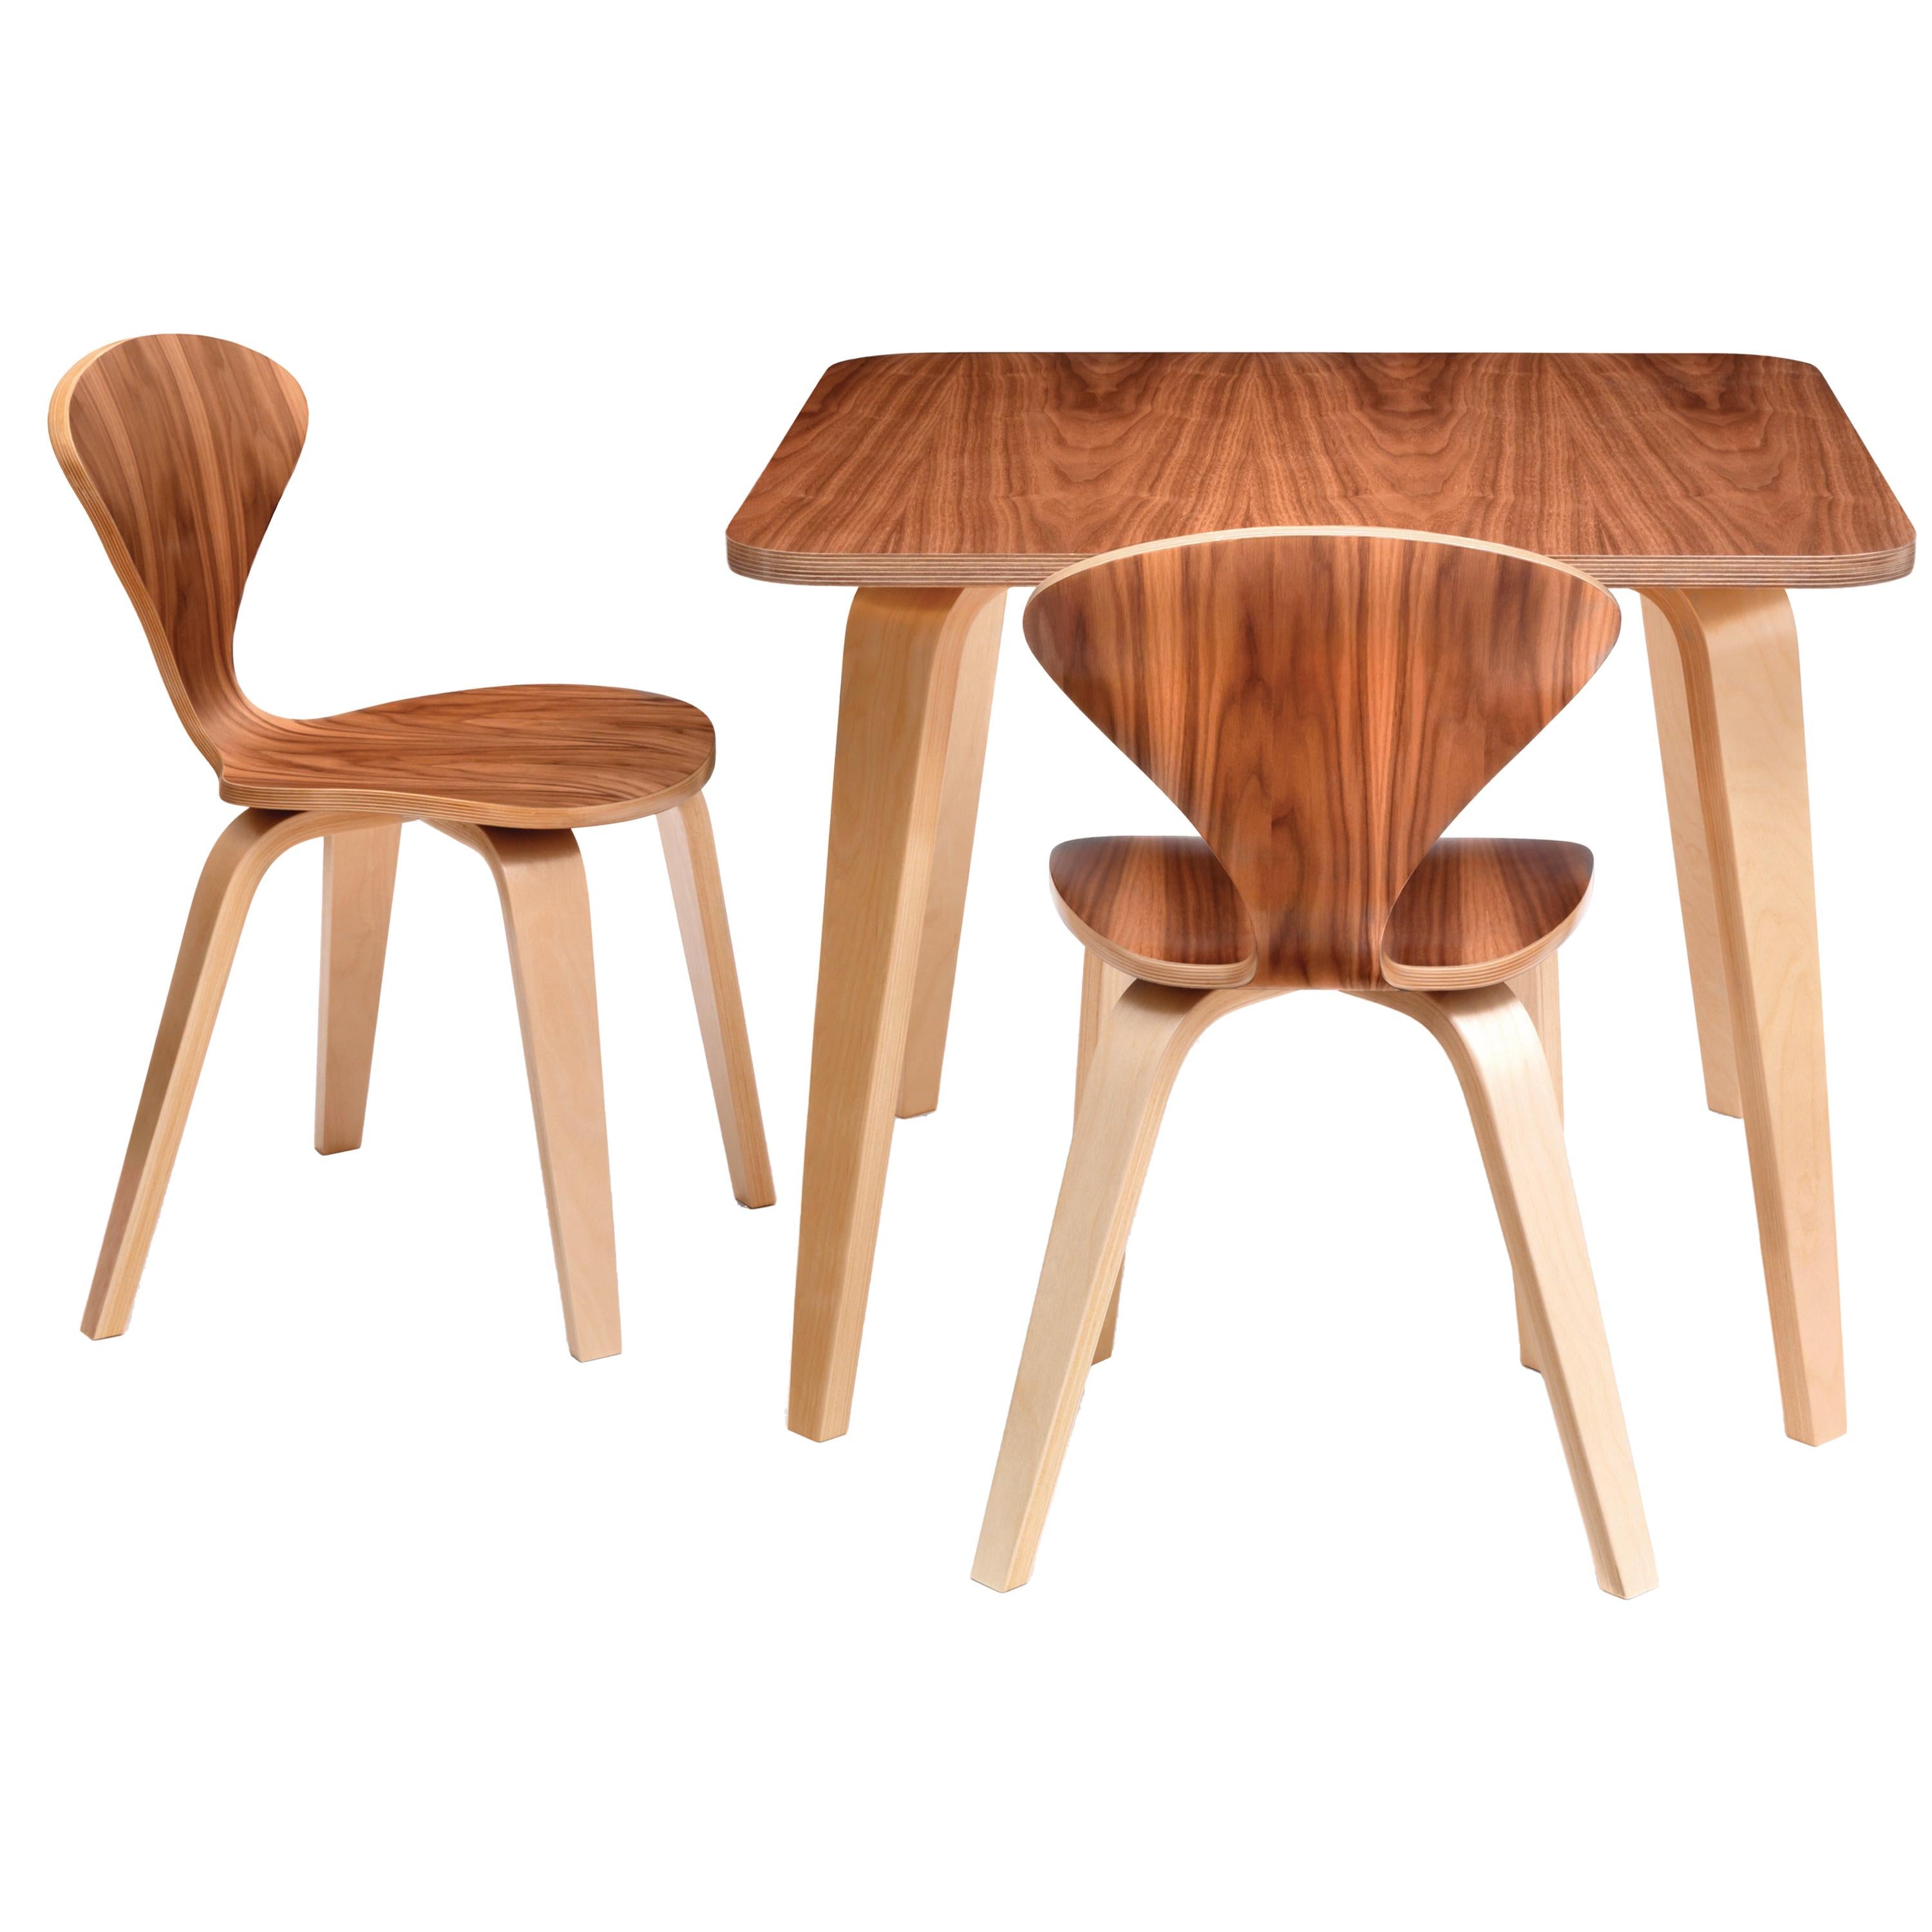 Cherner Square Play Table in Walnut by Benjamin Cherner, Contemporary, USA, 2007 For Sale